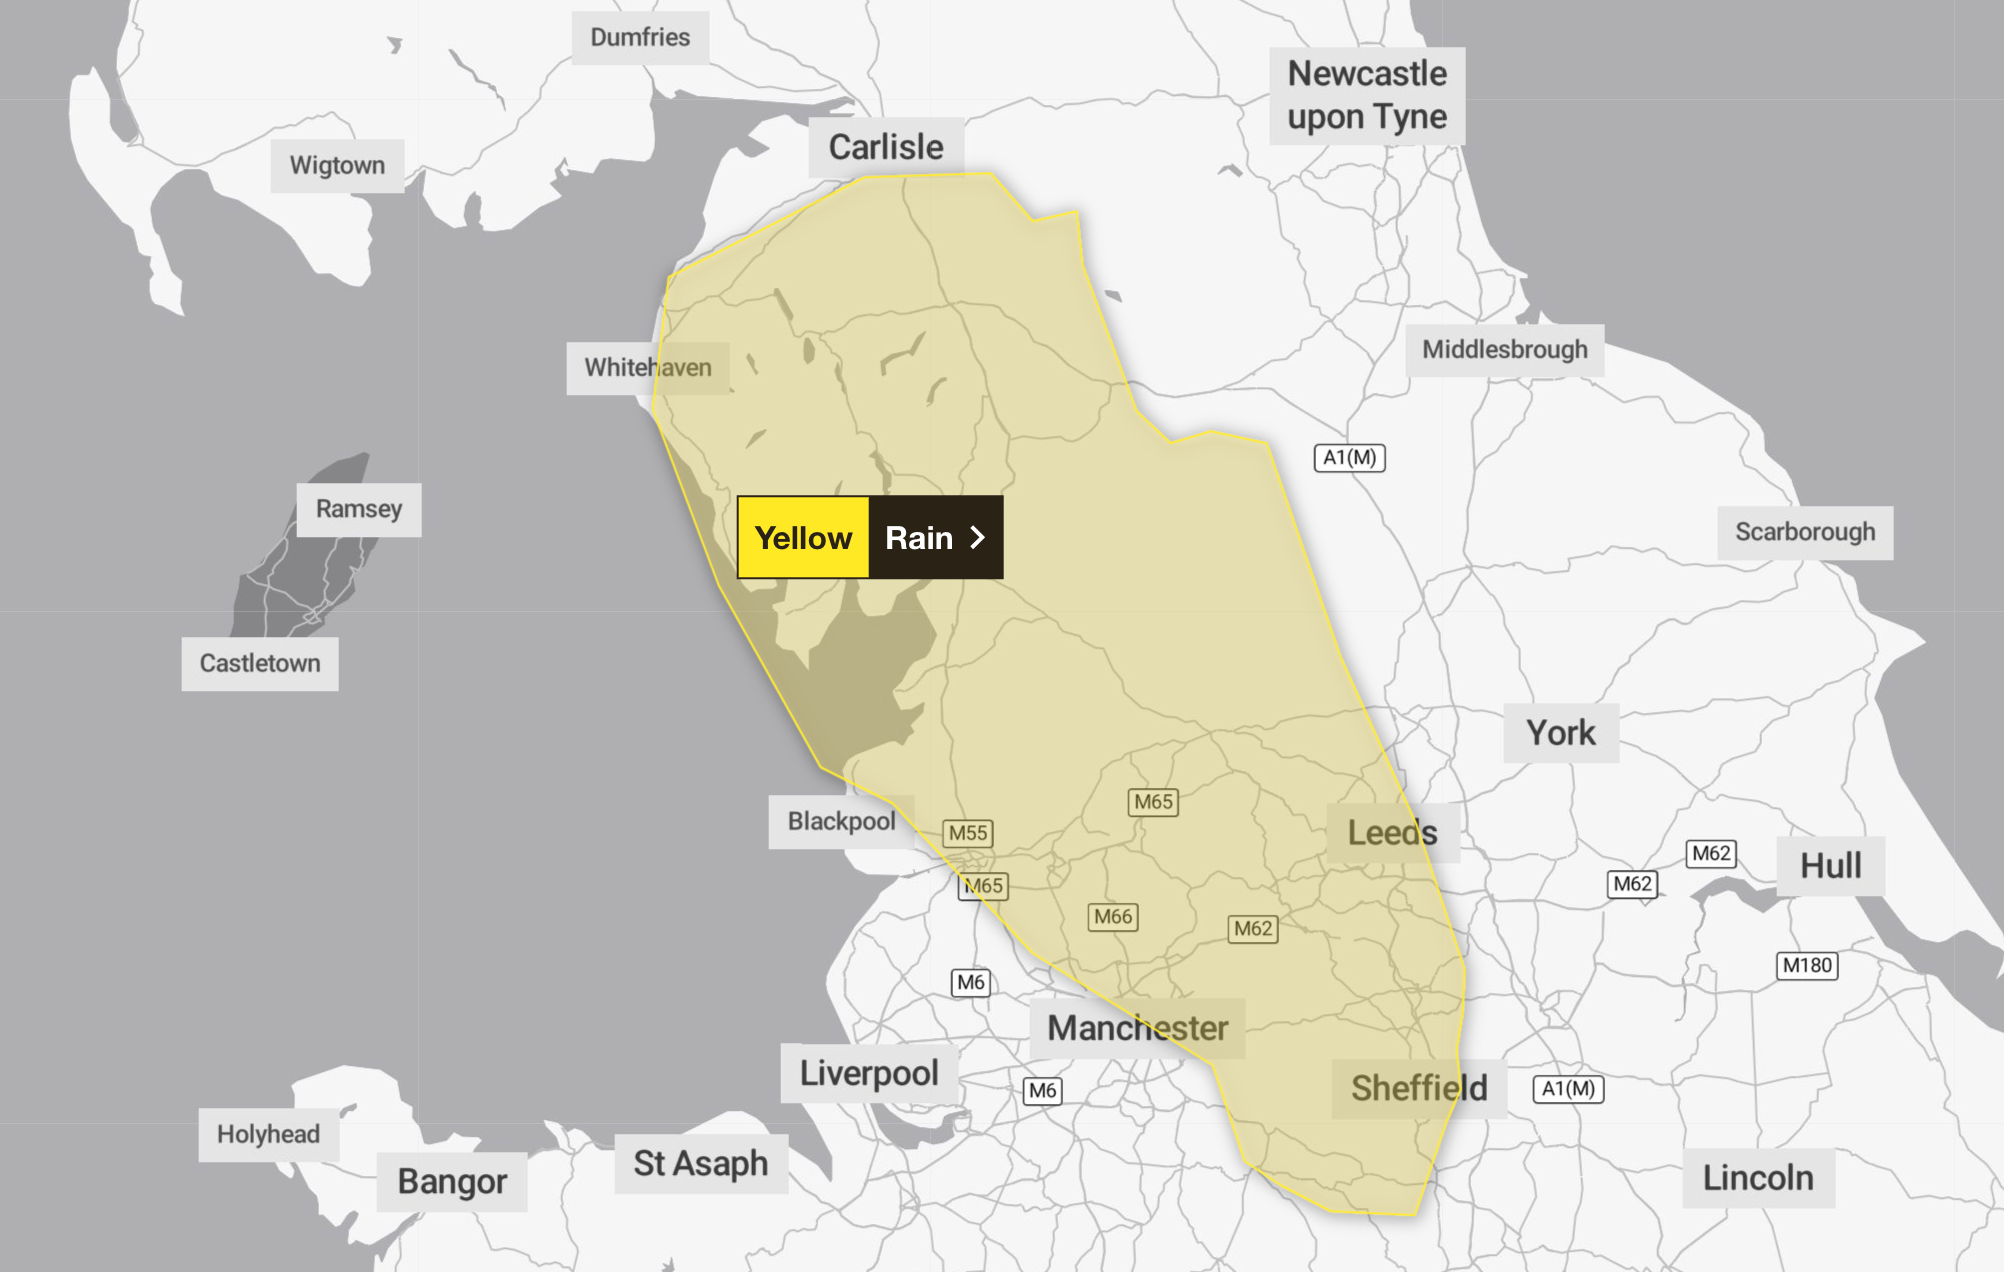 A single weather warning is currently in place for Sunday 10 December, warning of the chance of heavy rain in northwestern England in the early hours